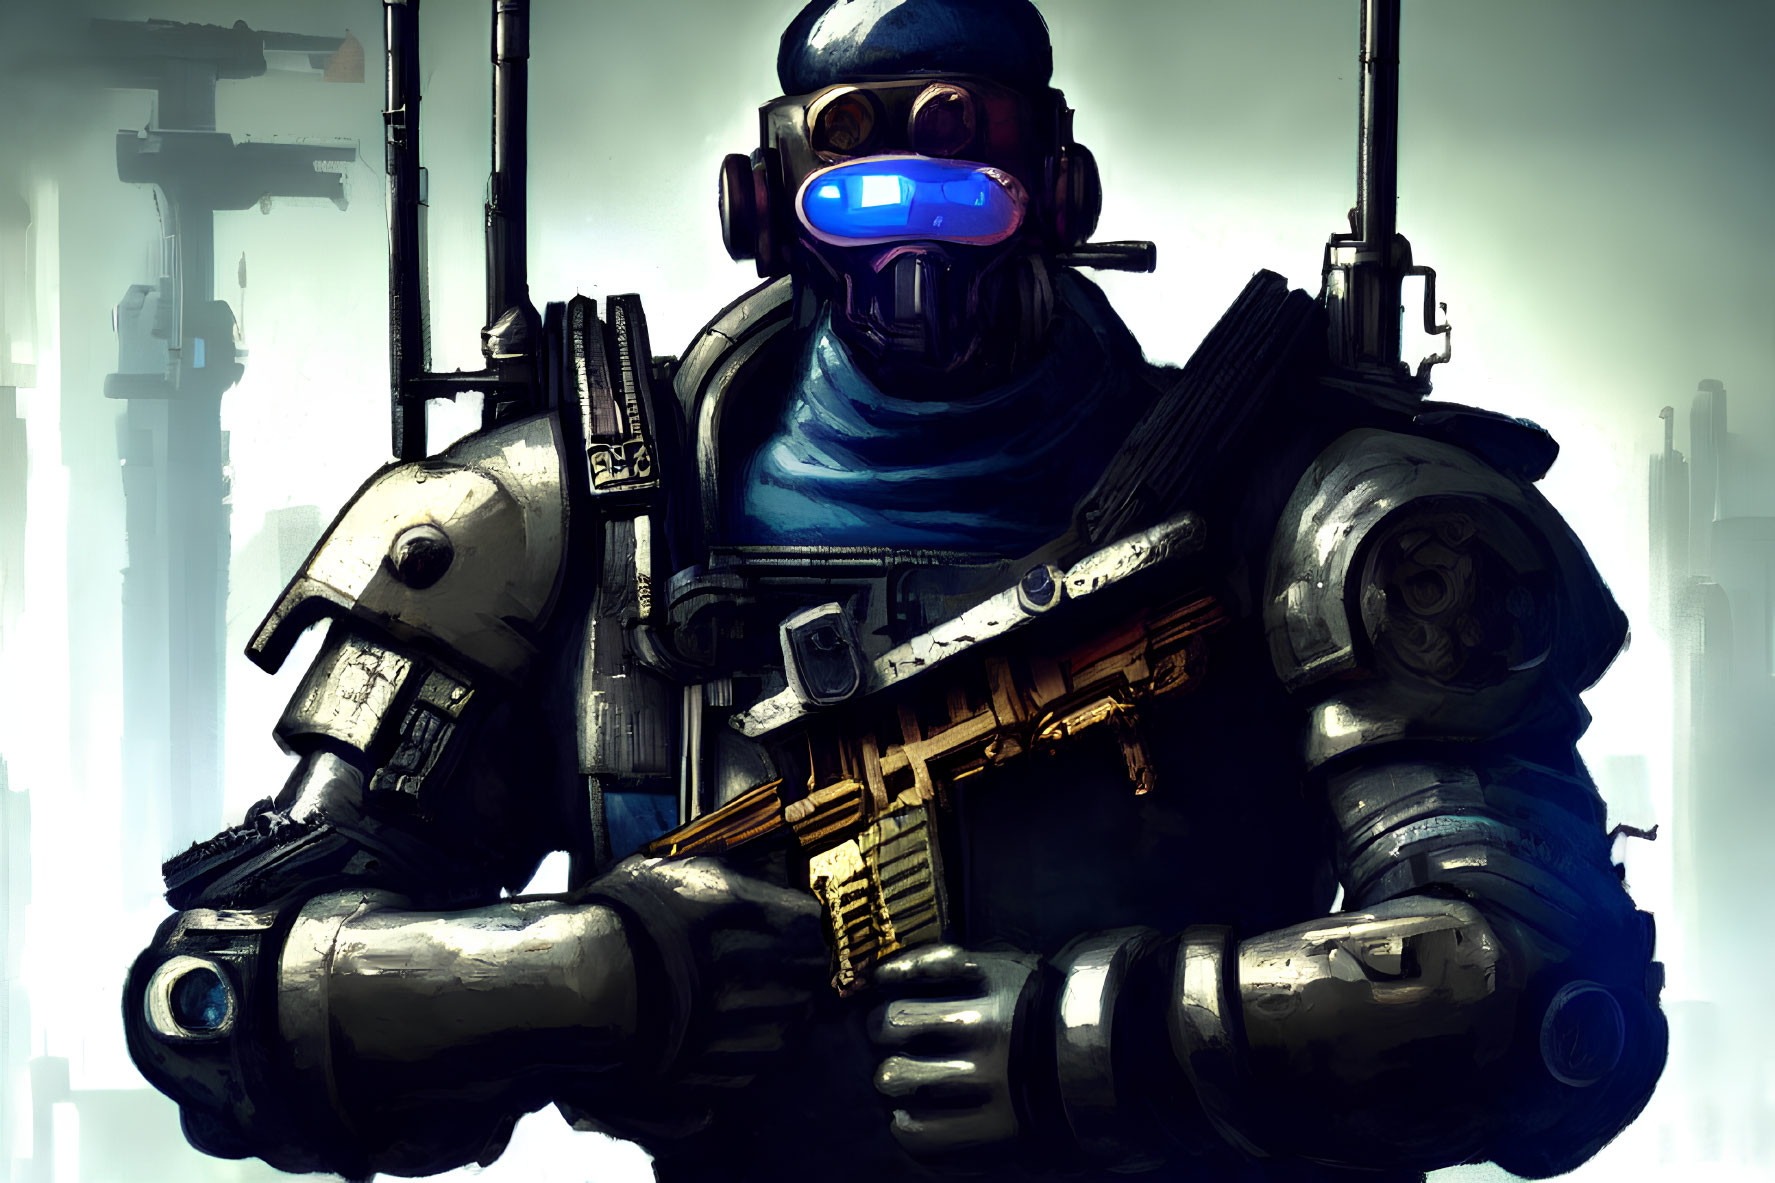 Futuristic soldier in gas mask and heavy armor with rifle, cityscape background